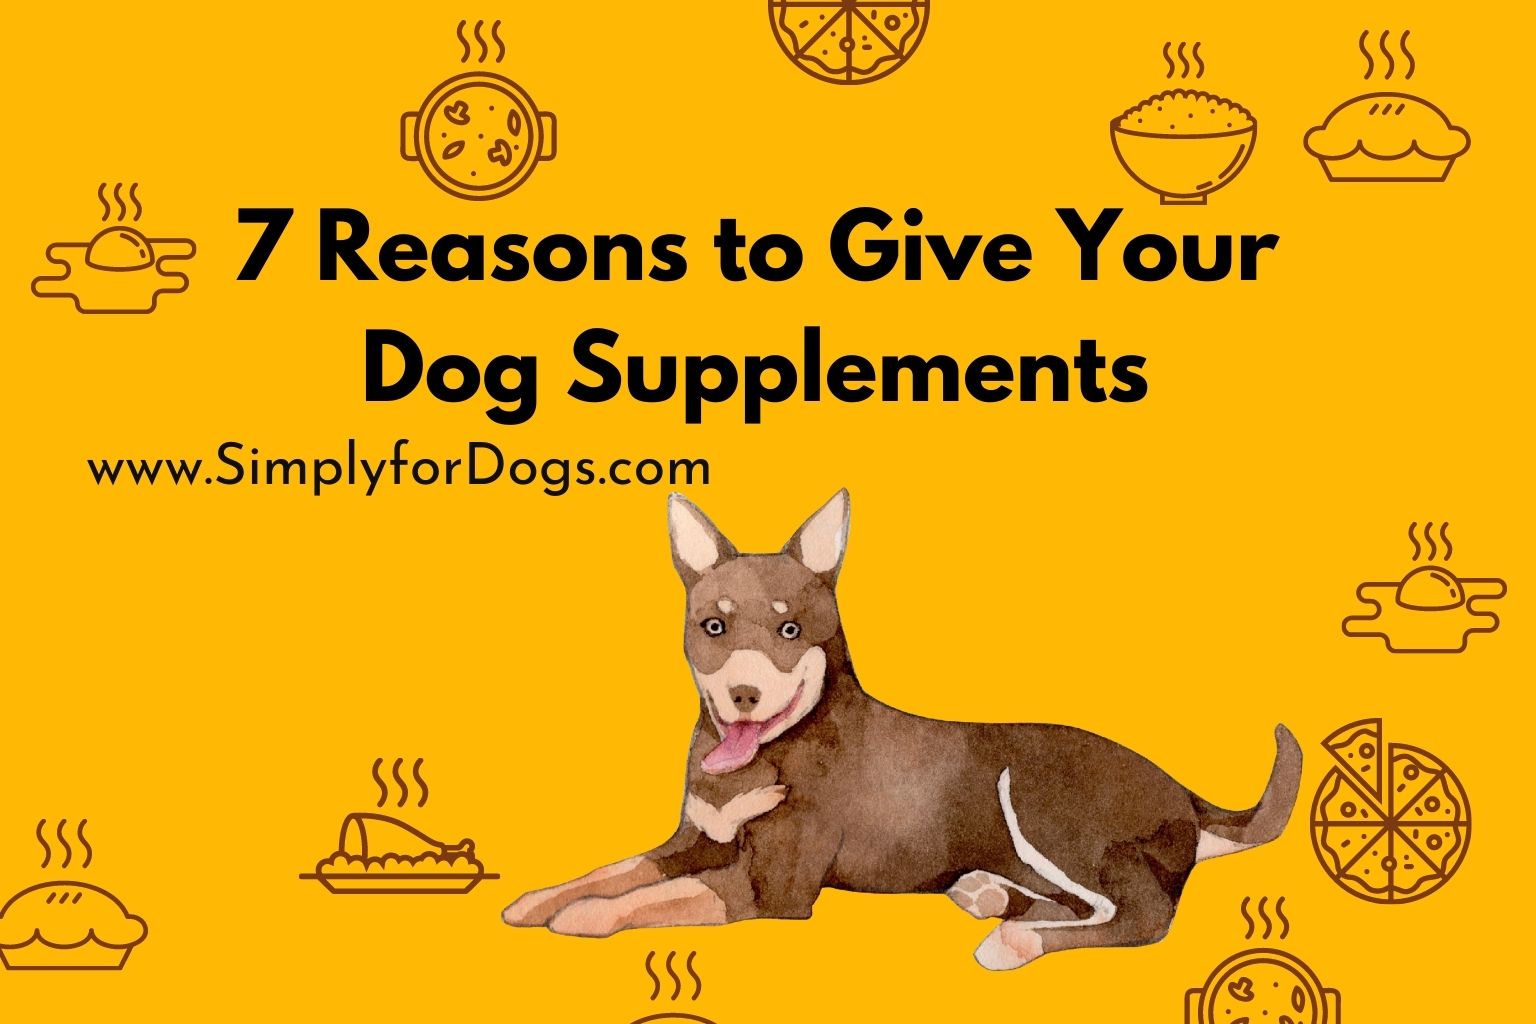 7 Reasons to Give Your Dog Supplements